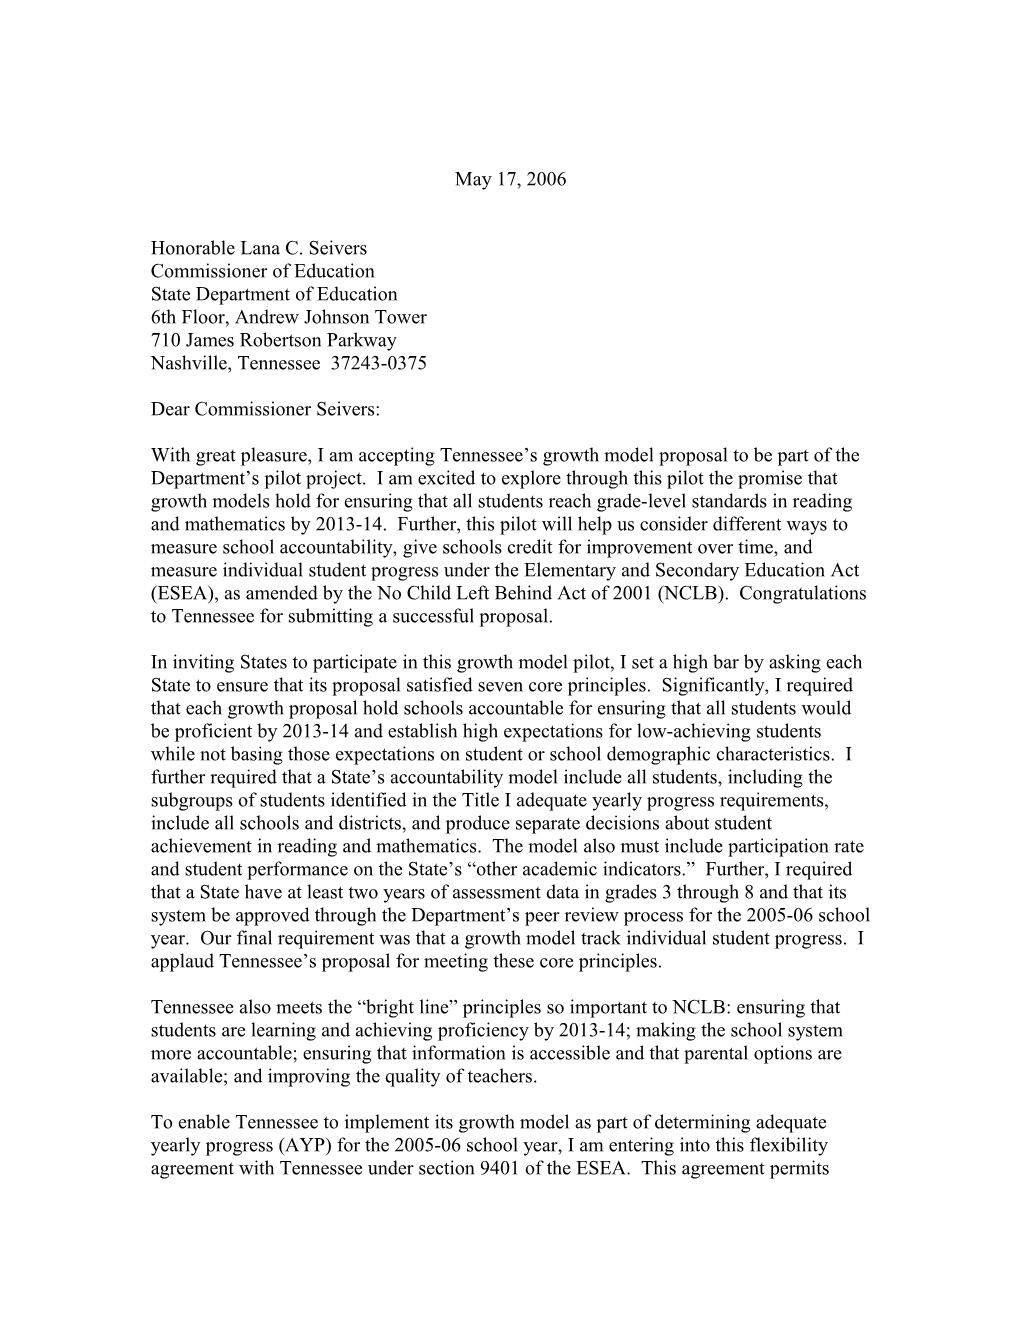 Tennessee Growth Model Decision Letter (MS Word)